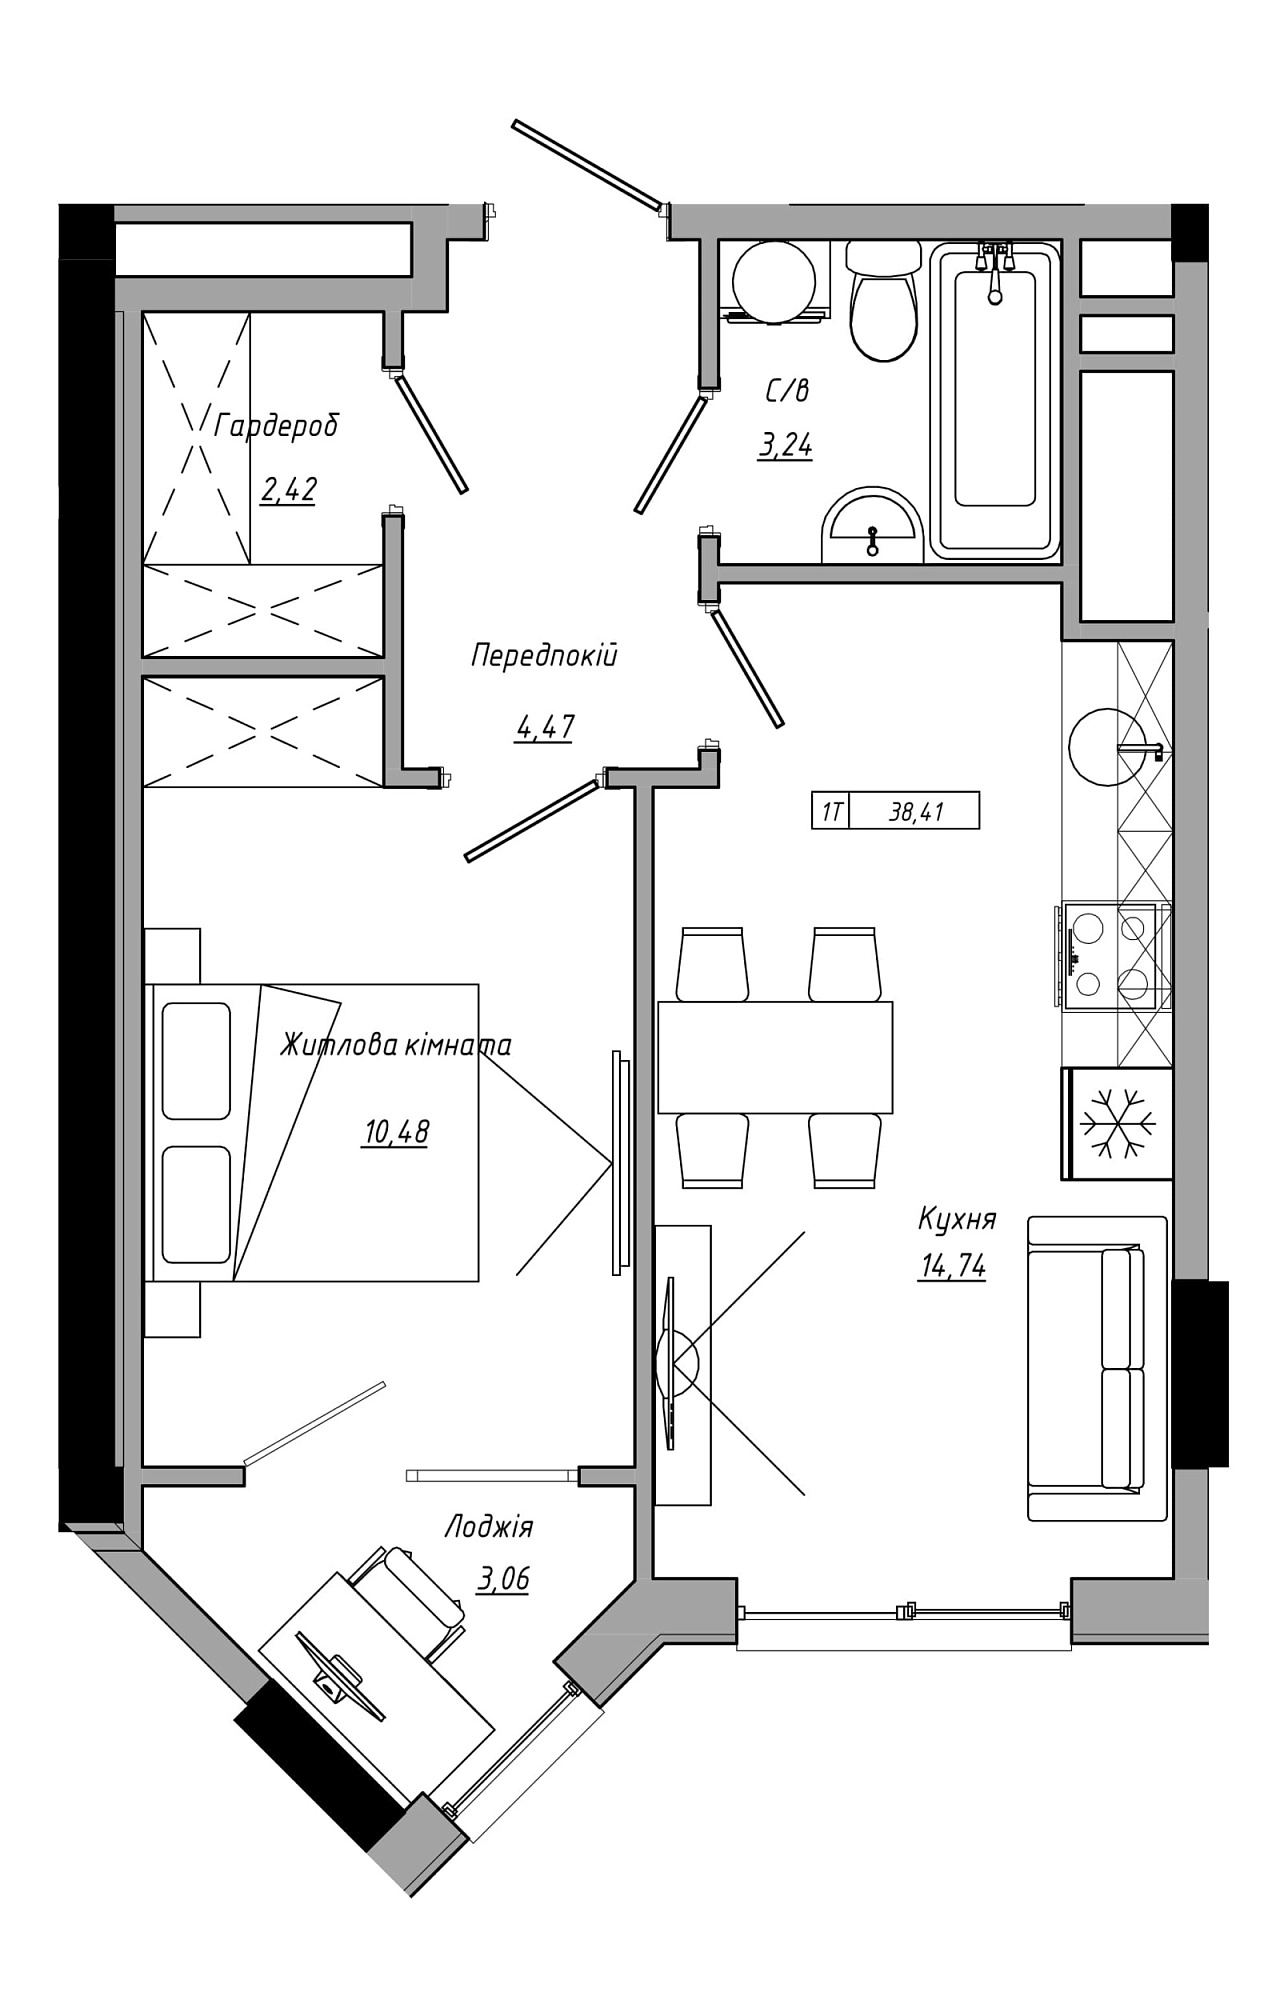 Planning 1-rm flats area 38.41m2, AB-21-12/00022.